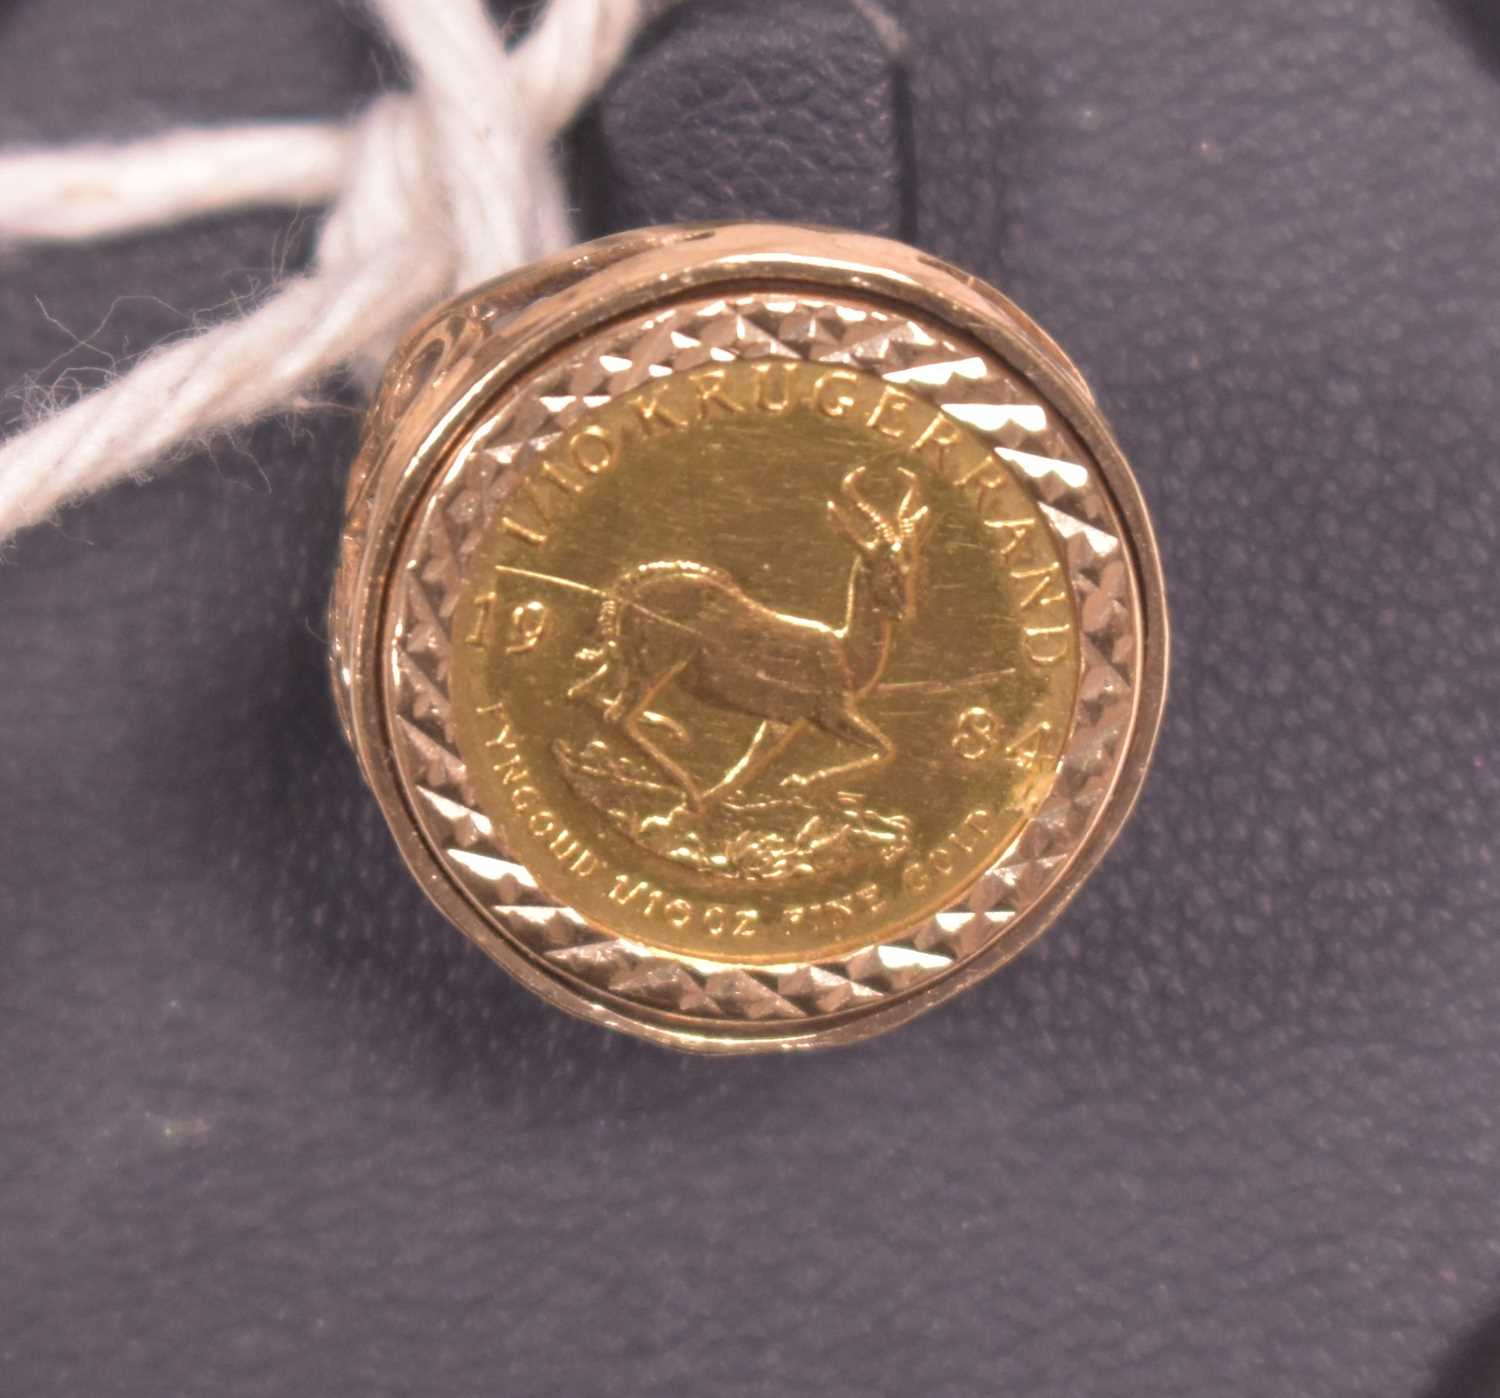 Lot 10 - 1/10 Krugerrand coin ring